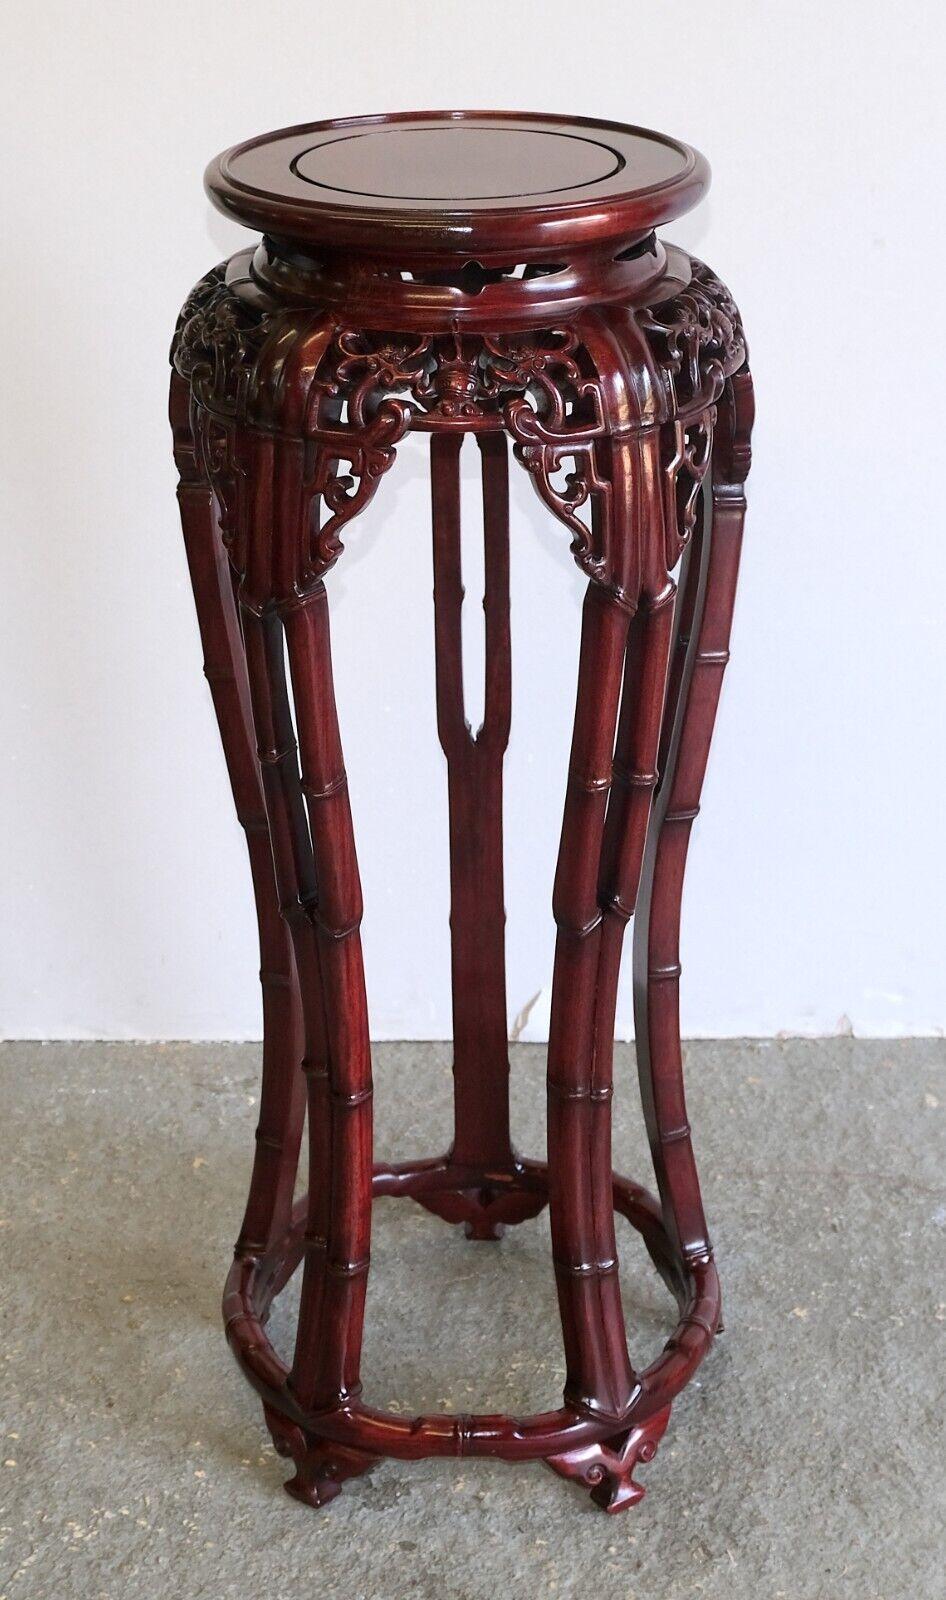 We are delighted to offer for sale this stunning hand carved Chinese dragons theme hardwood plant stand round top. 

This solid and eye catching piece is just stunning from any point of view. Under the top and all around shows the nicely carved